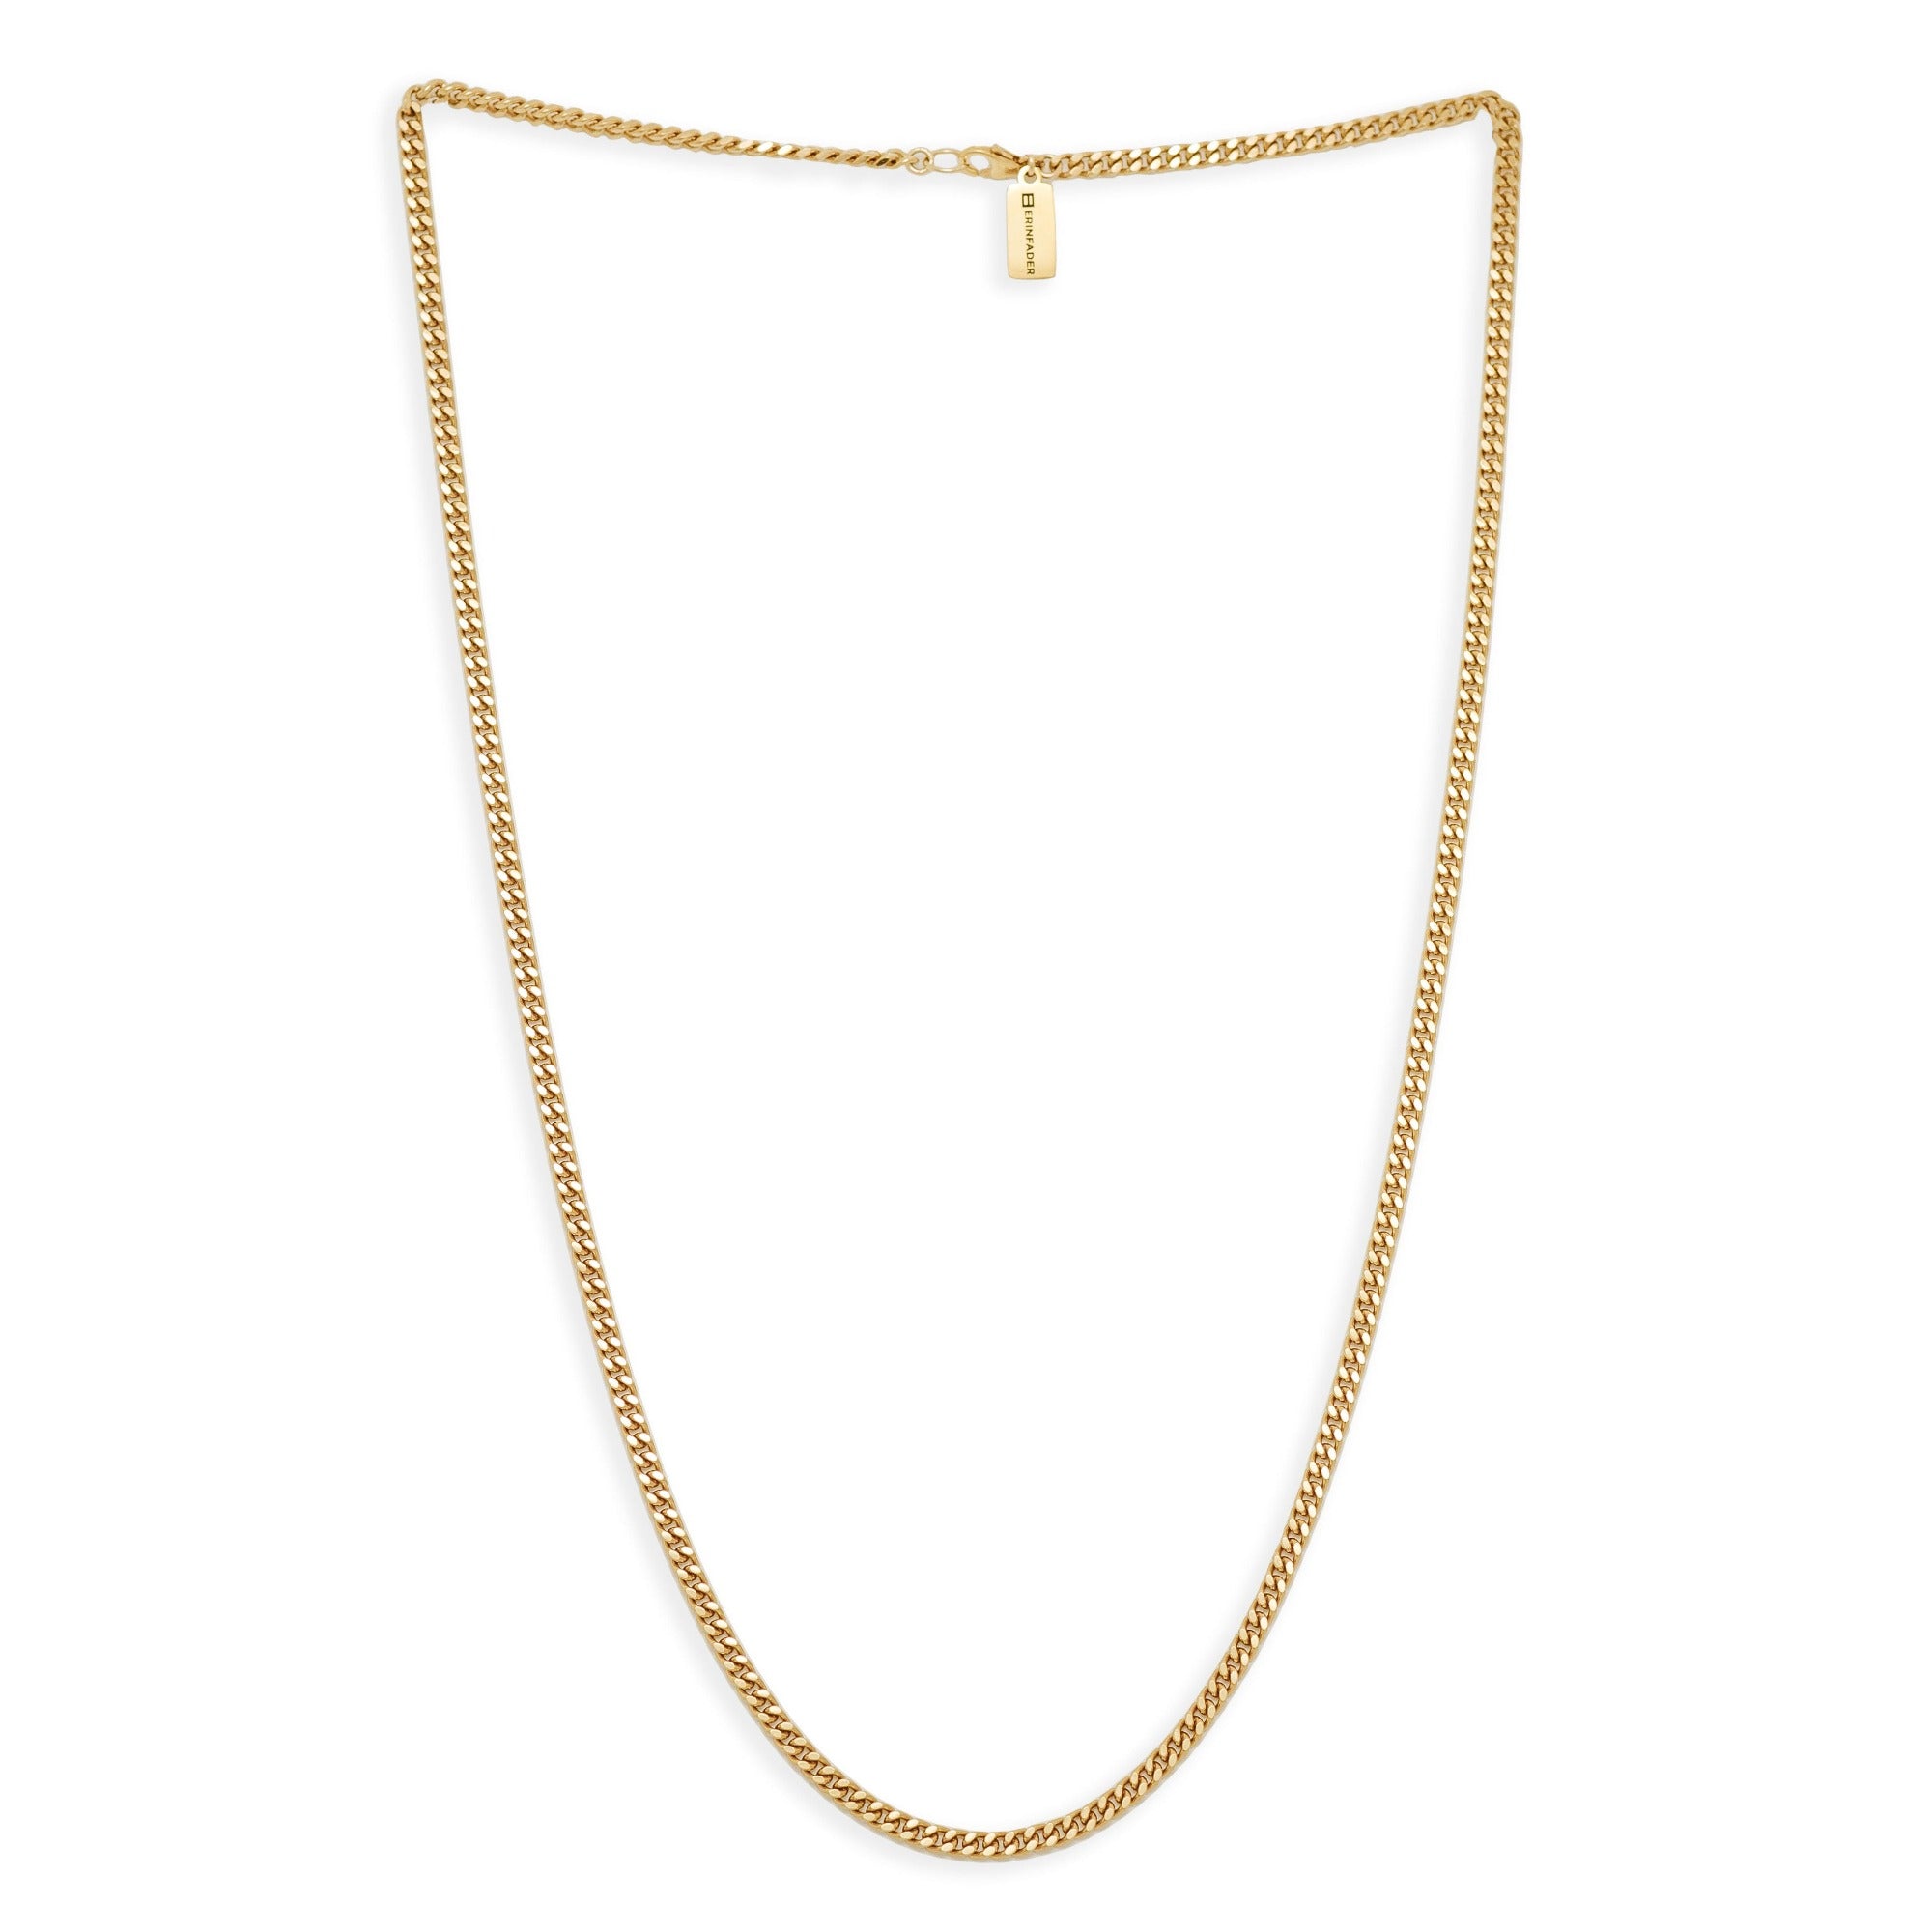 Men's Heidi Chain Necklace by Erin Fader Jewelry